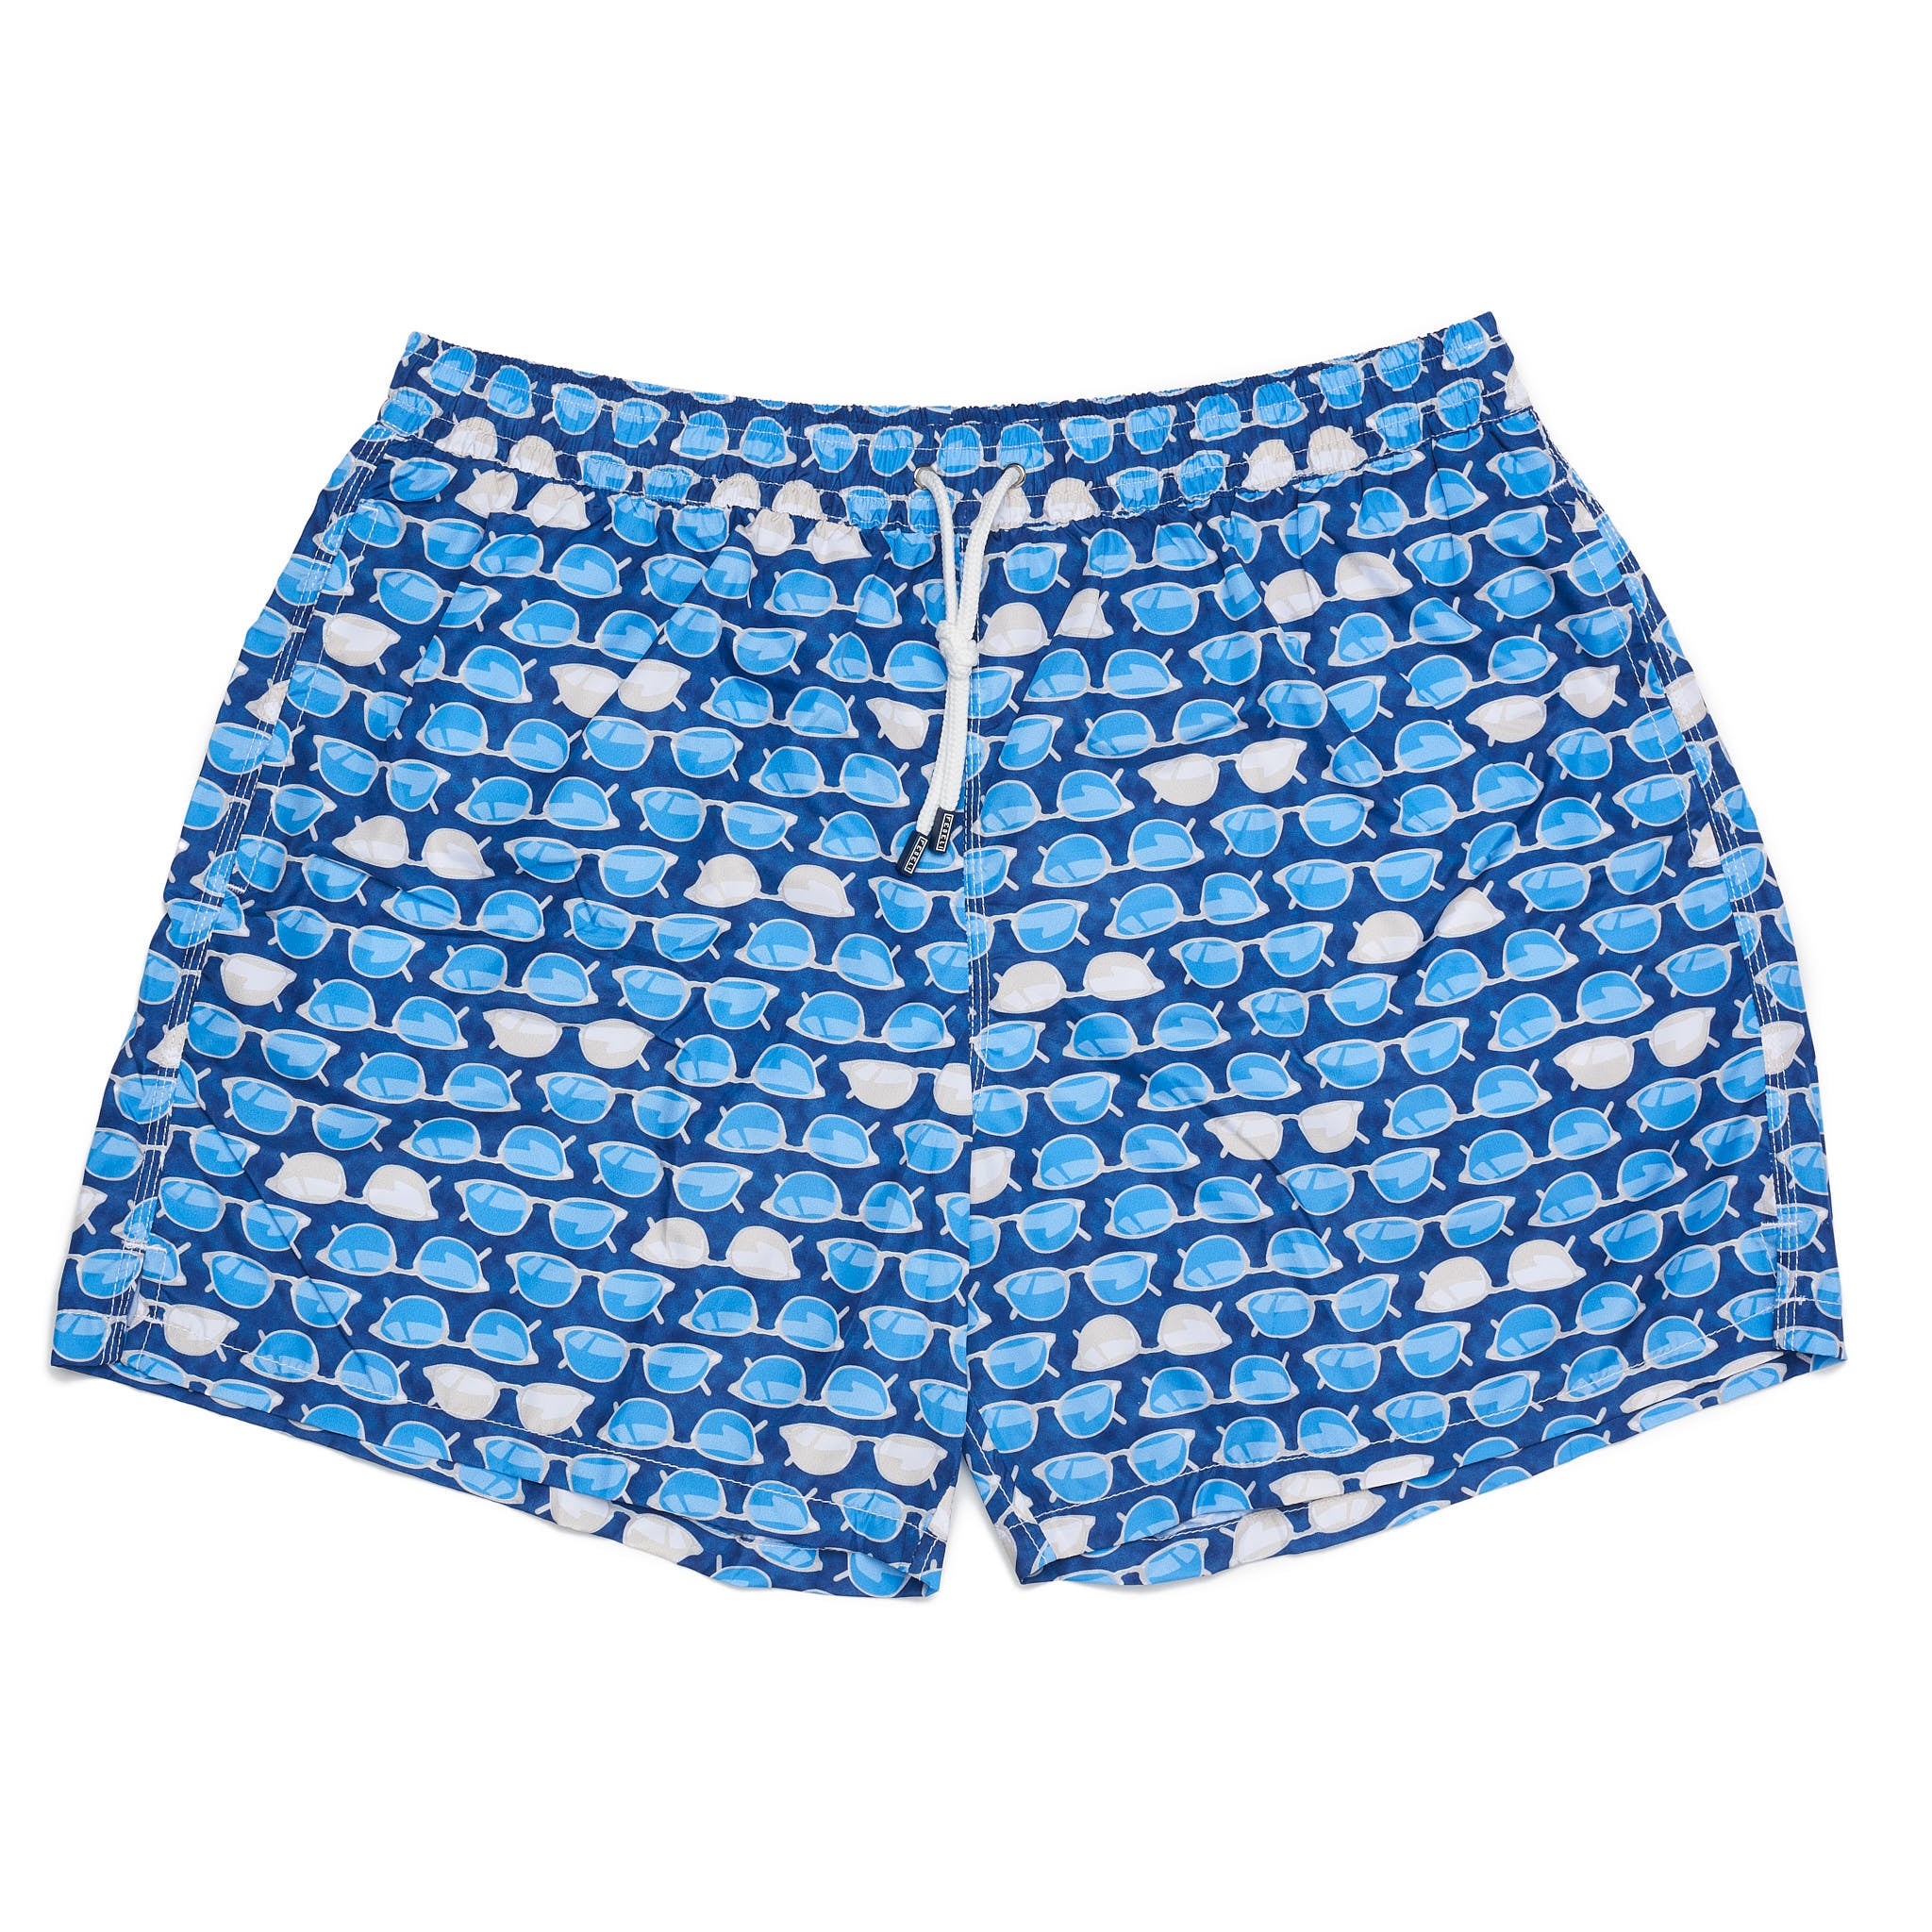 FEDELI Made in Italy Blue Sunglasses Print Madeira Airstop Swim Shorts Trunks NEW FEDELI